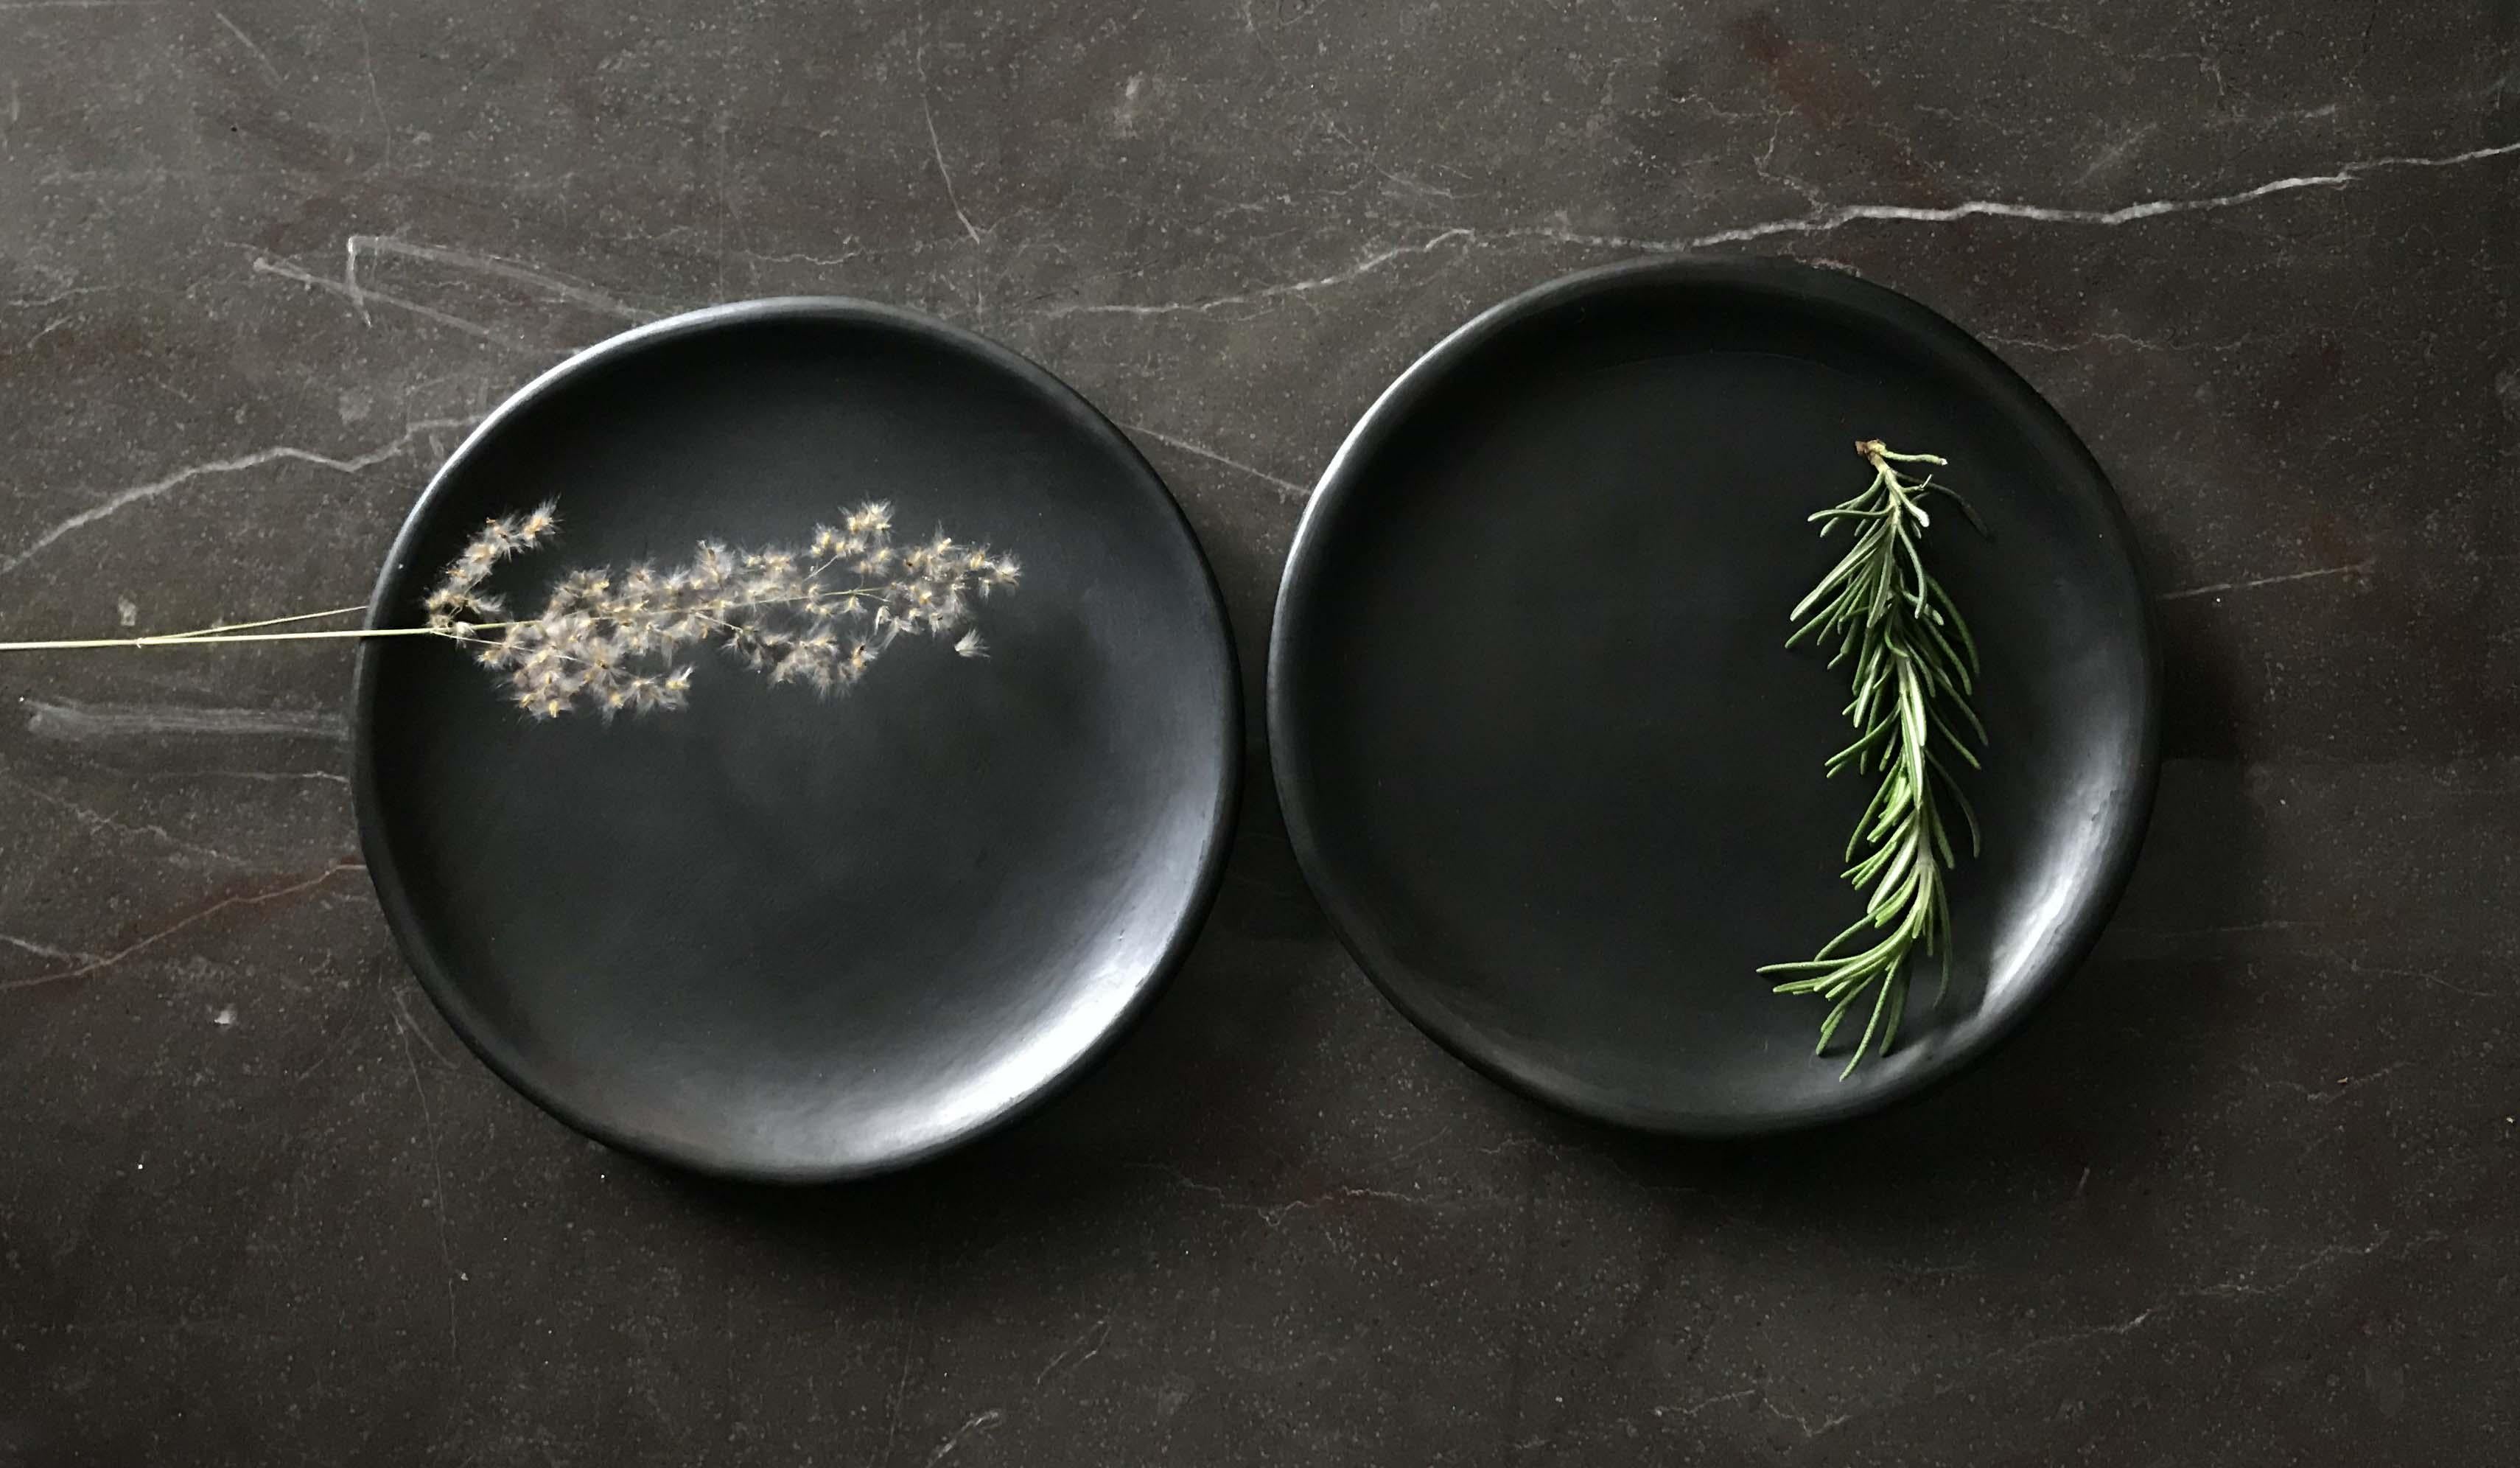 Oaxacan black clay 20cm plates handmade tableware burnished barro negro Oaxaca. Set of 6 pieces 

The soft and rich color makes this side plate a stylish partner to bread, butter or more spectacular starters.

Handmade in Oaxaca, a state rich in